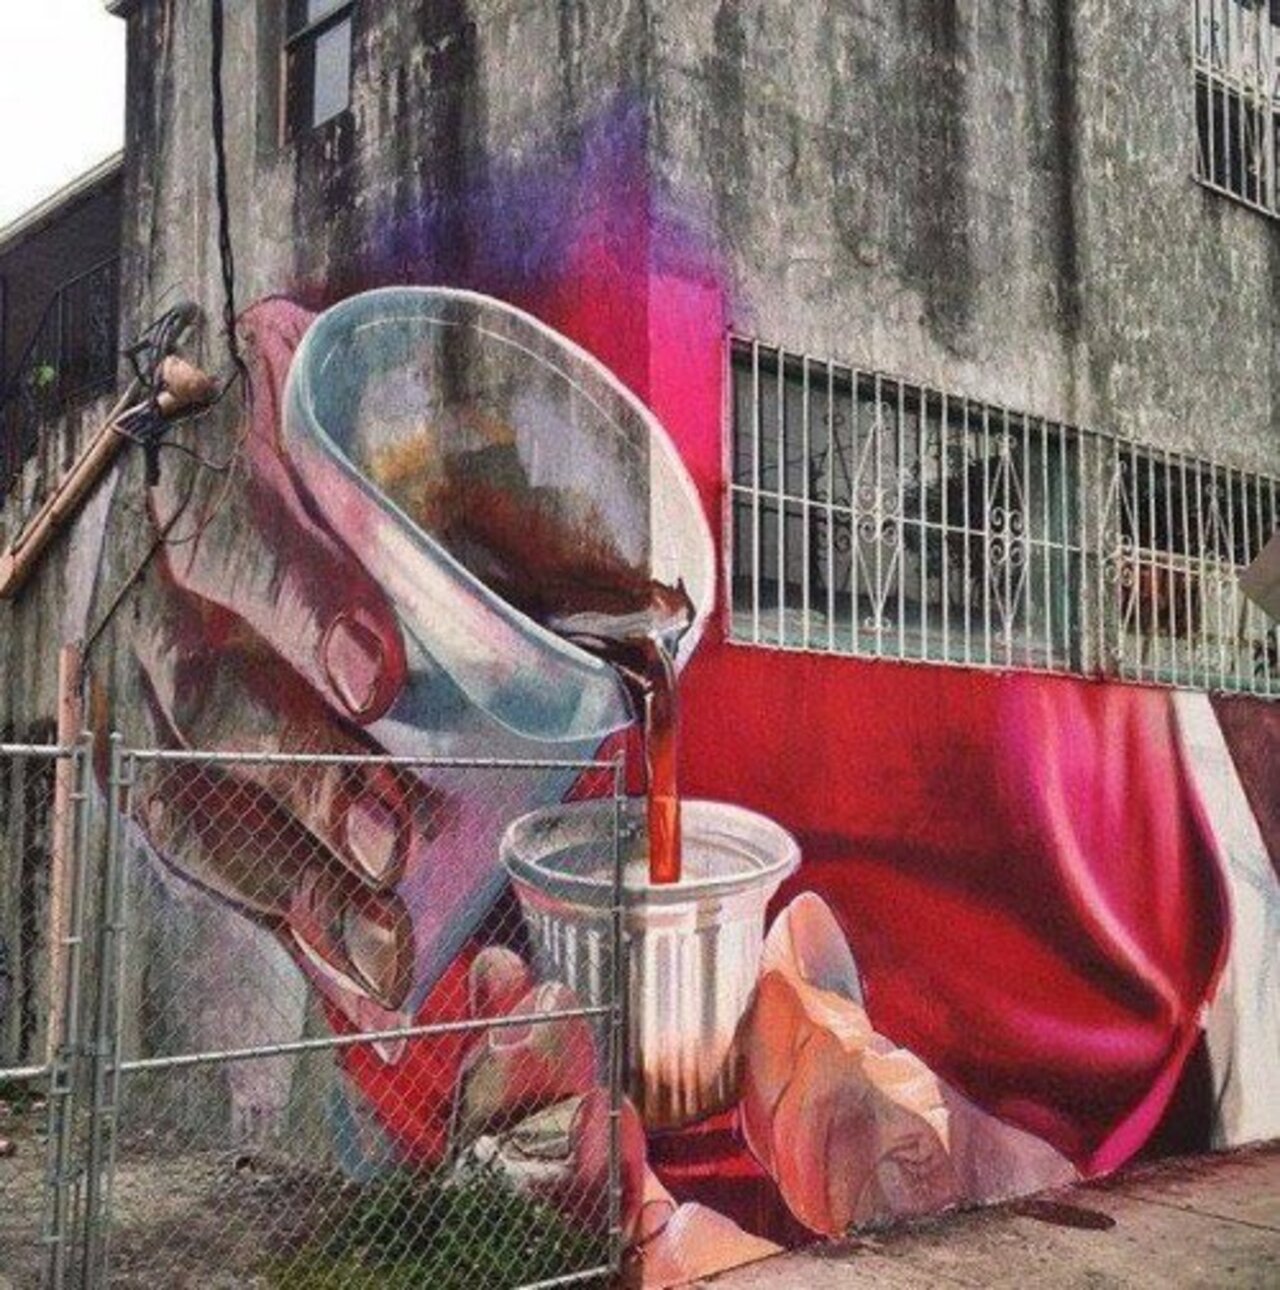 #switch #streetart 'a cup of something' by #casemaclaim in #miami #graffiti #arte #art #bedifferent https://t.co/tc5fg1oTxY